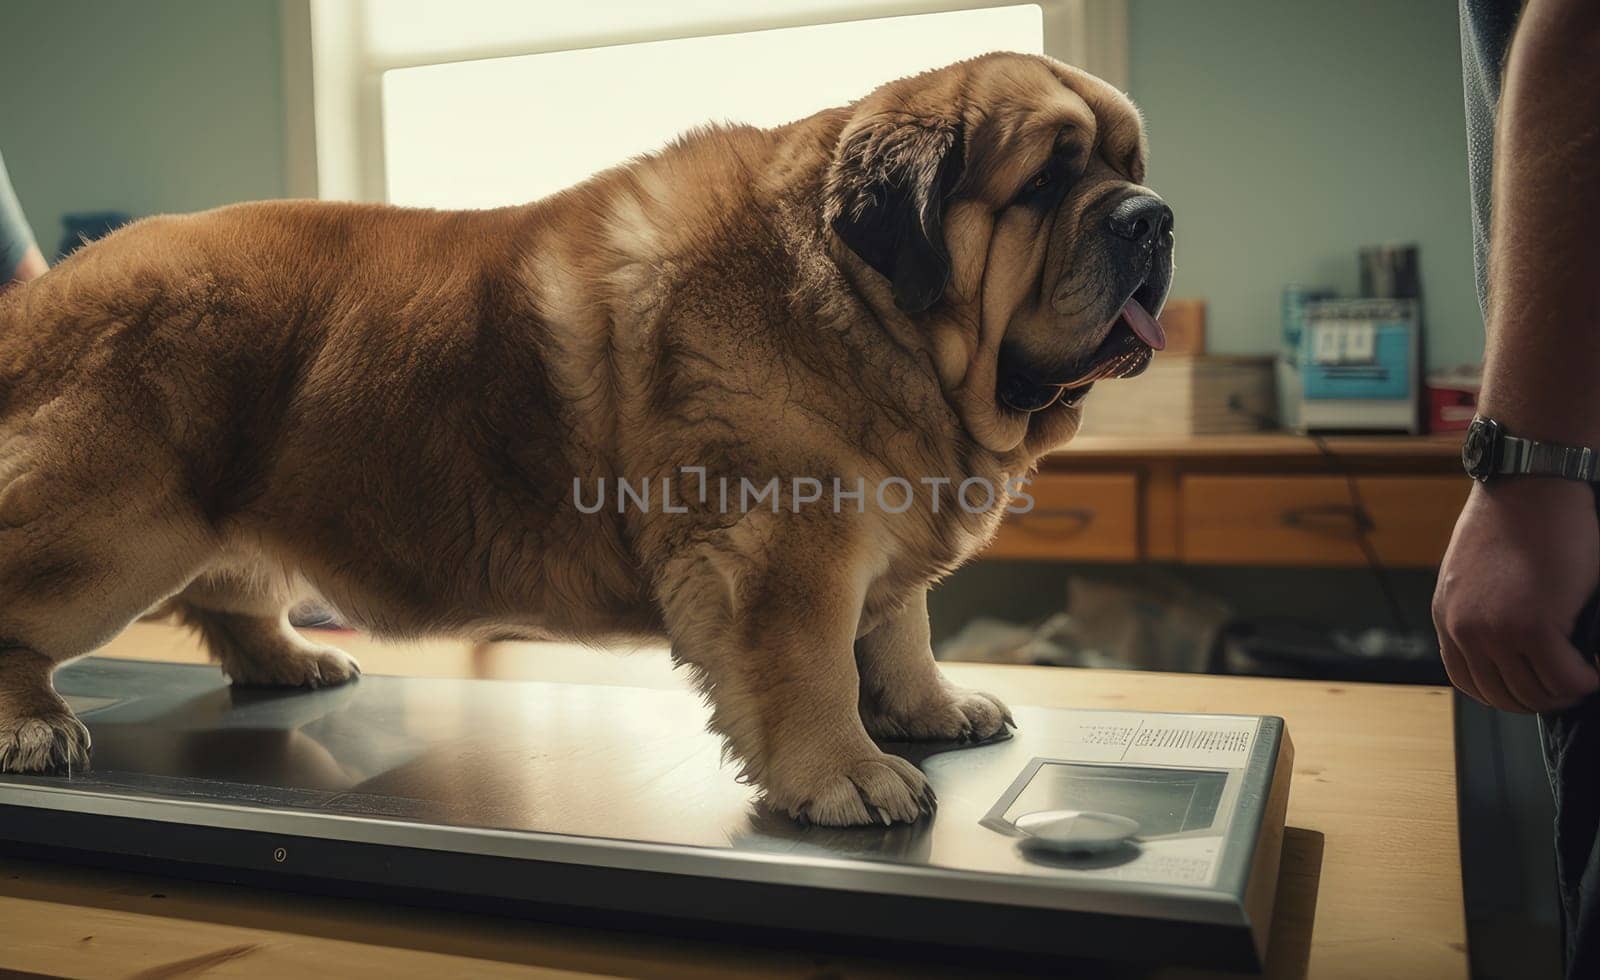 A large, fat, obese dog at a veterinarian's appointment in a clinic. Concept of care and concern for pets and obesity by Alla_Yurtayeva